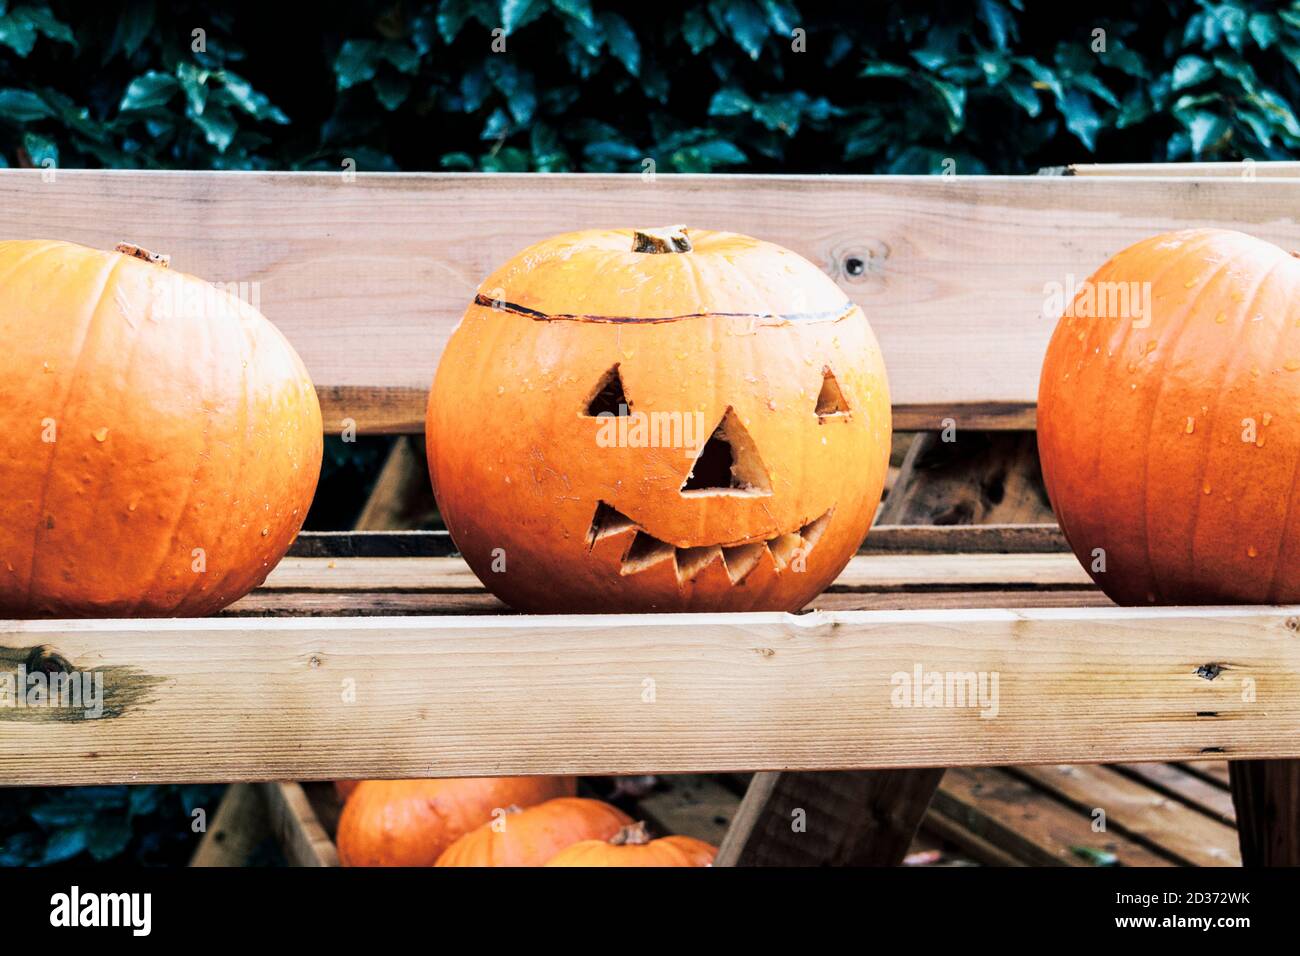 Three pumpkins on a wooden rack, the centre one have a Halloween face carved into it Stock Photo